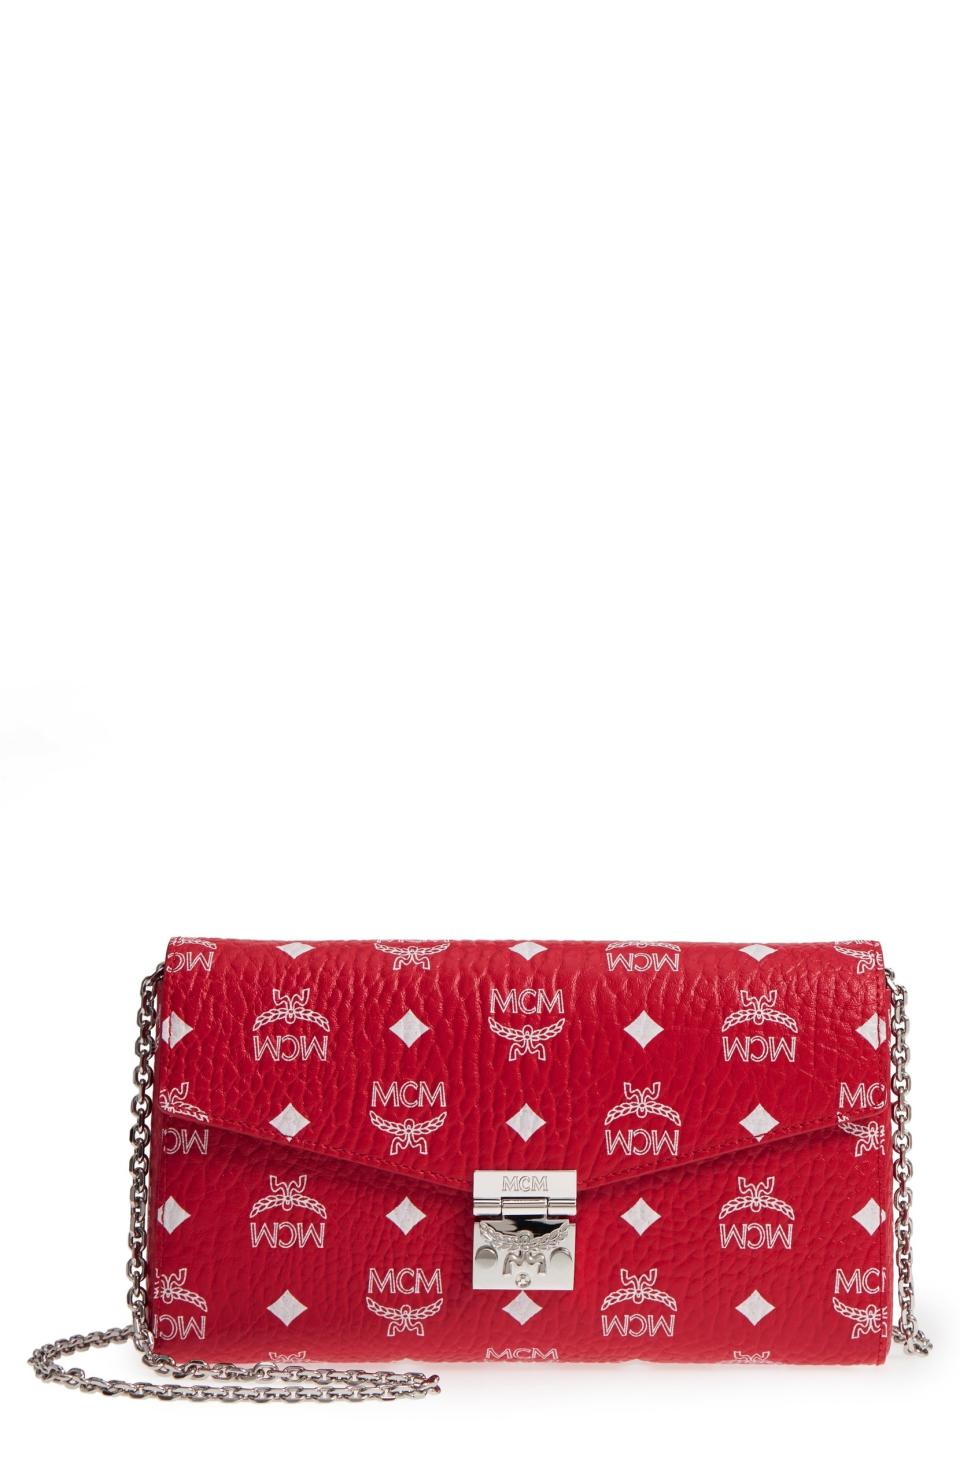 MCM Visetos Canvas Wallet on a Chain, $495 $329; at Nordstrom